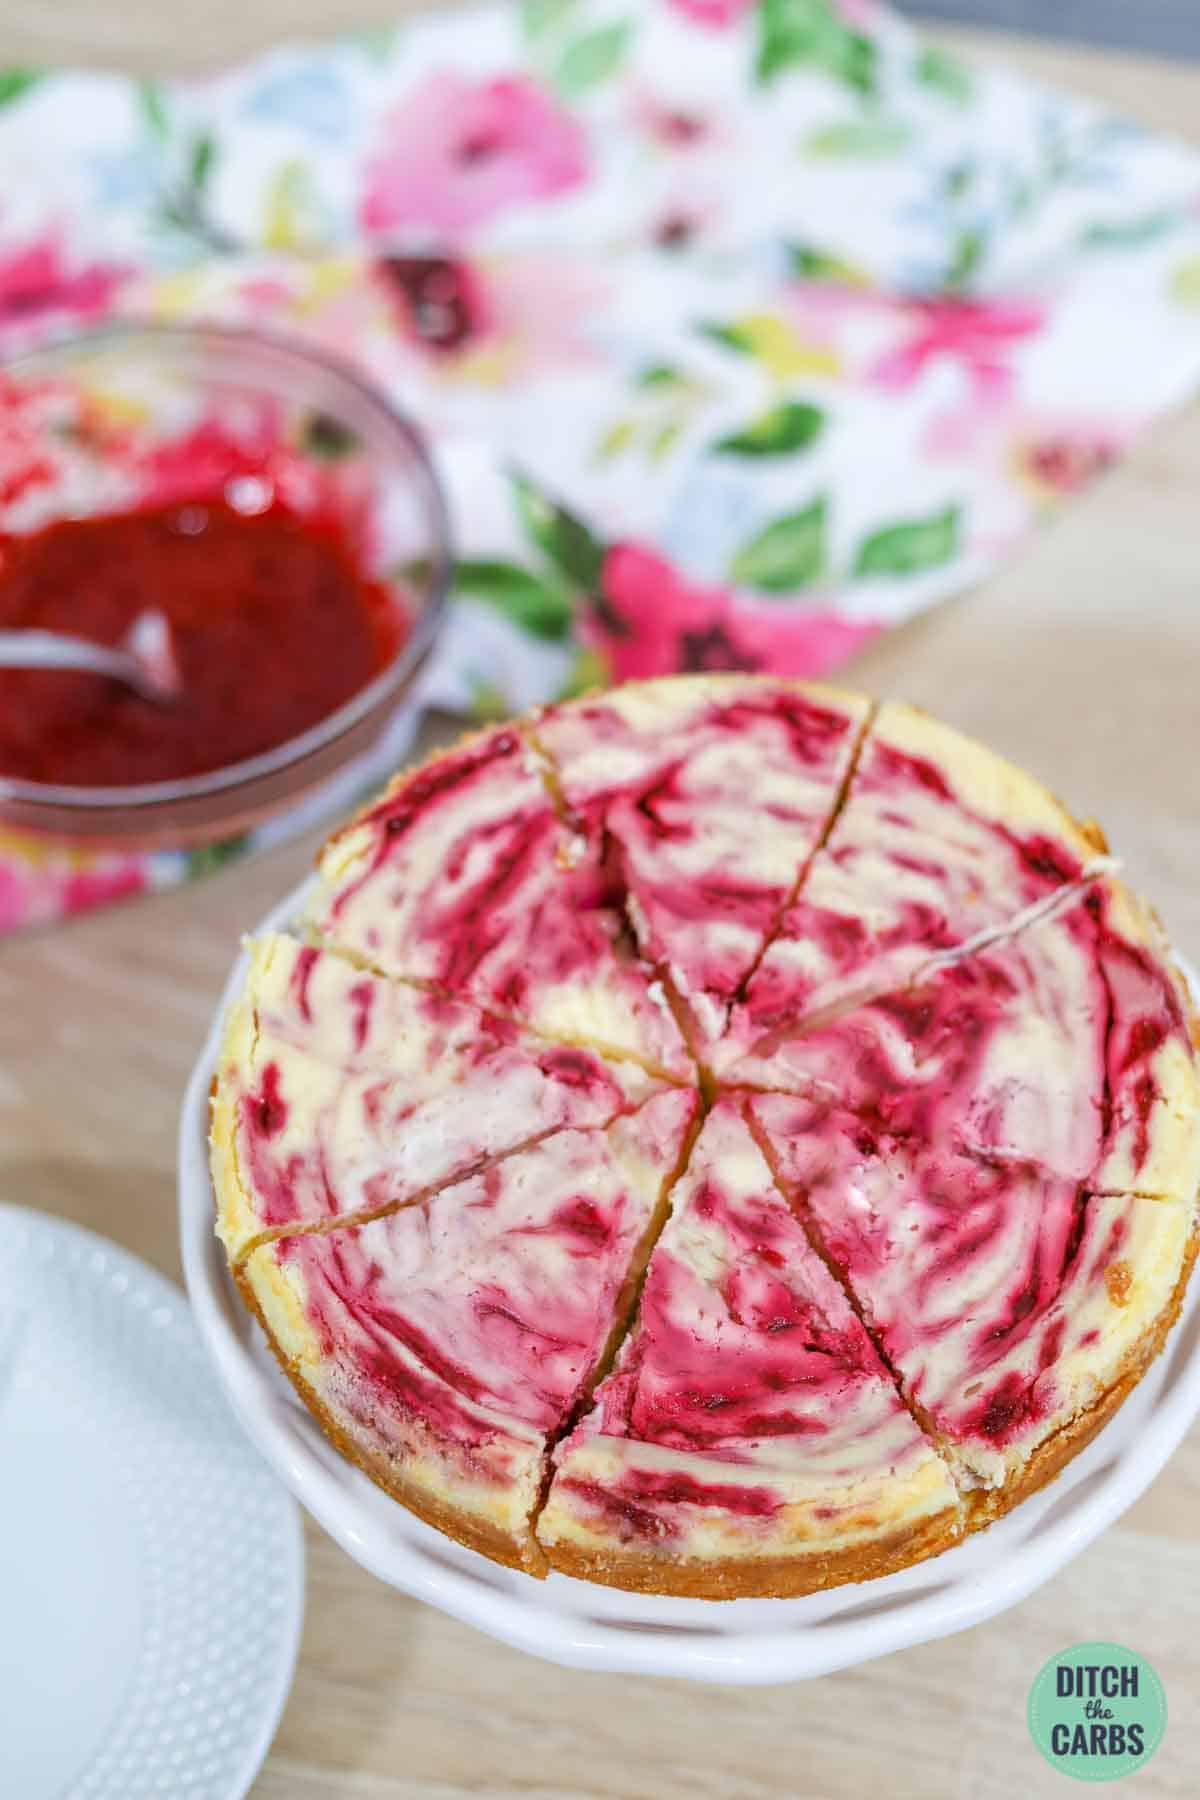 keto raspberry cheesecake baked and sliced into 8 pieces